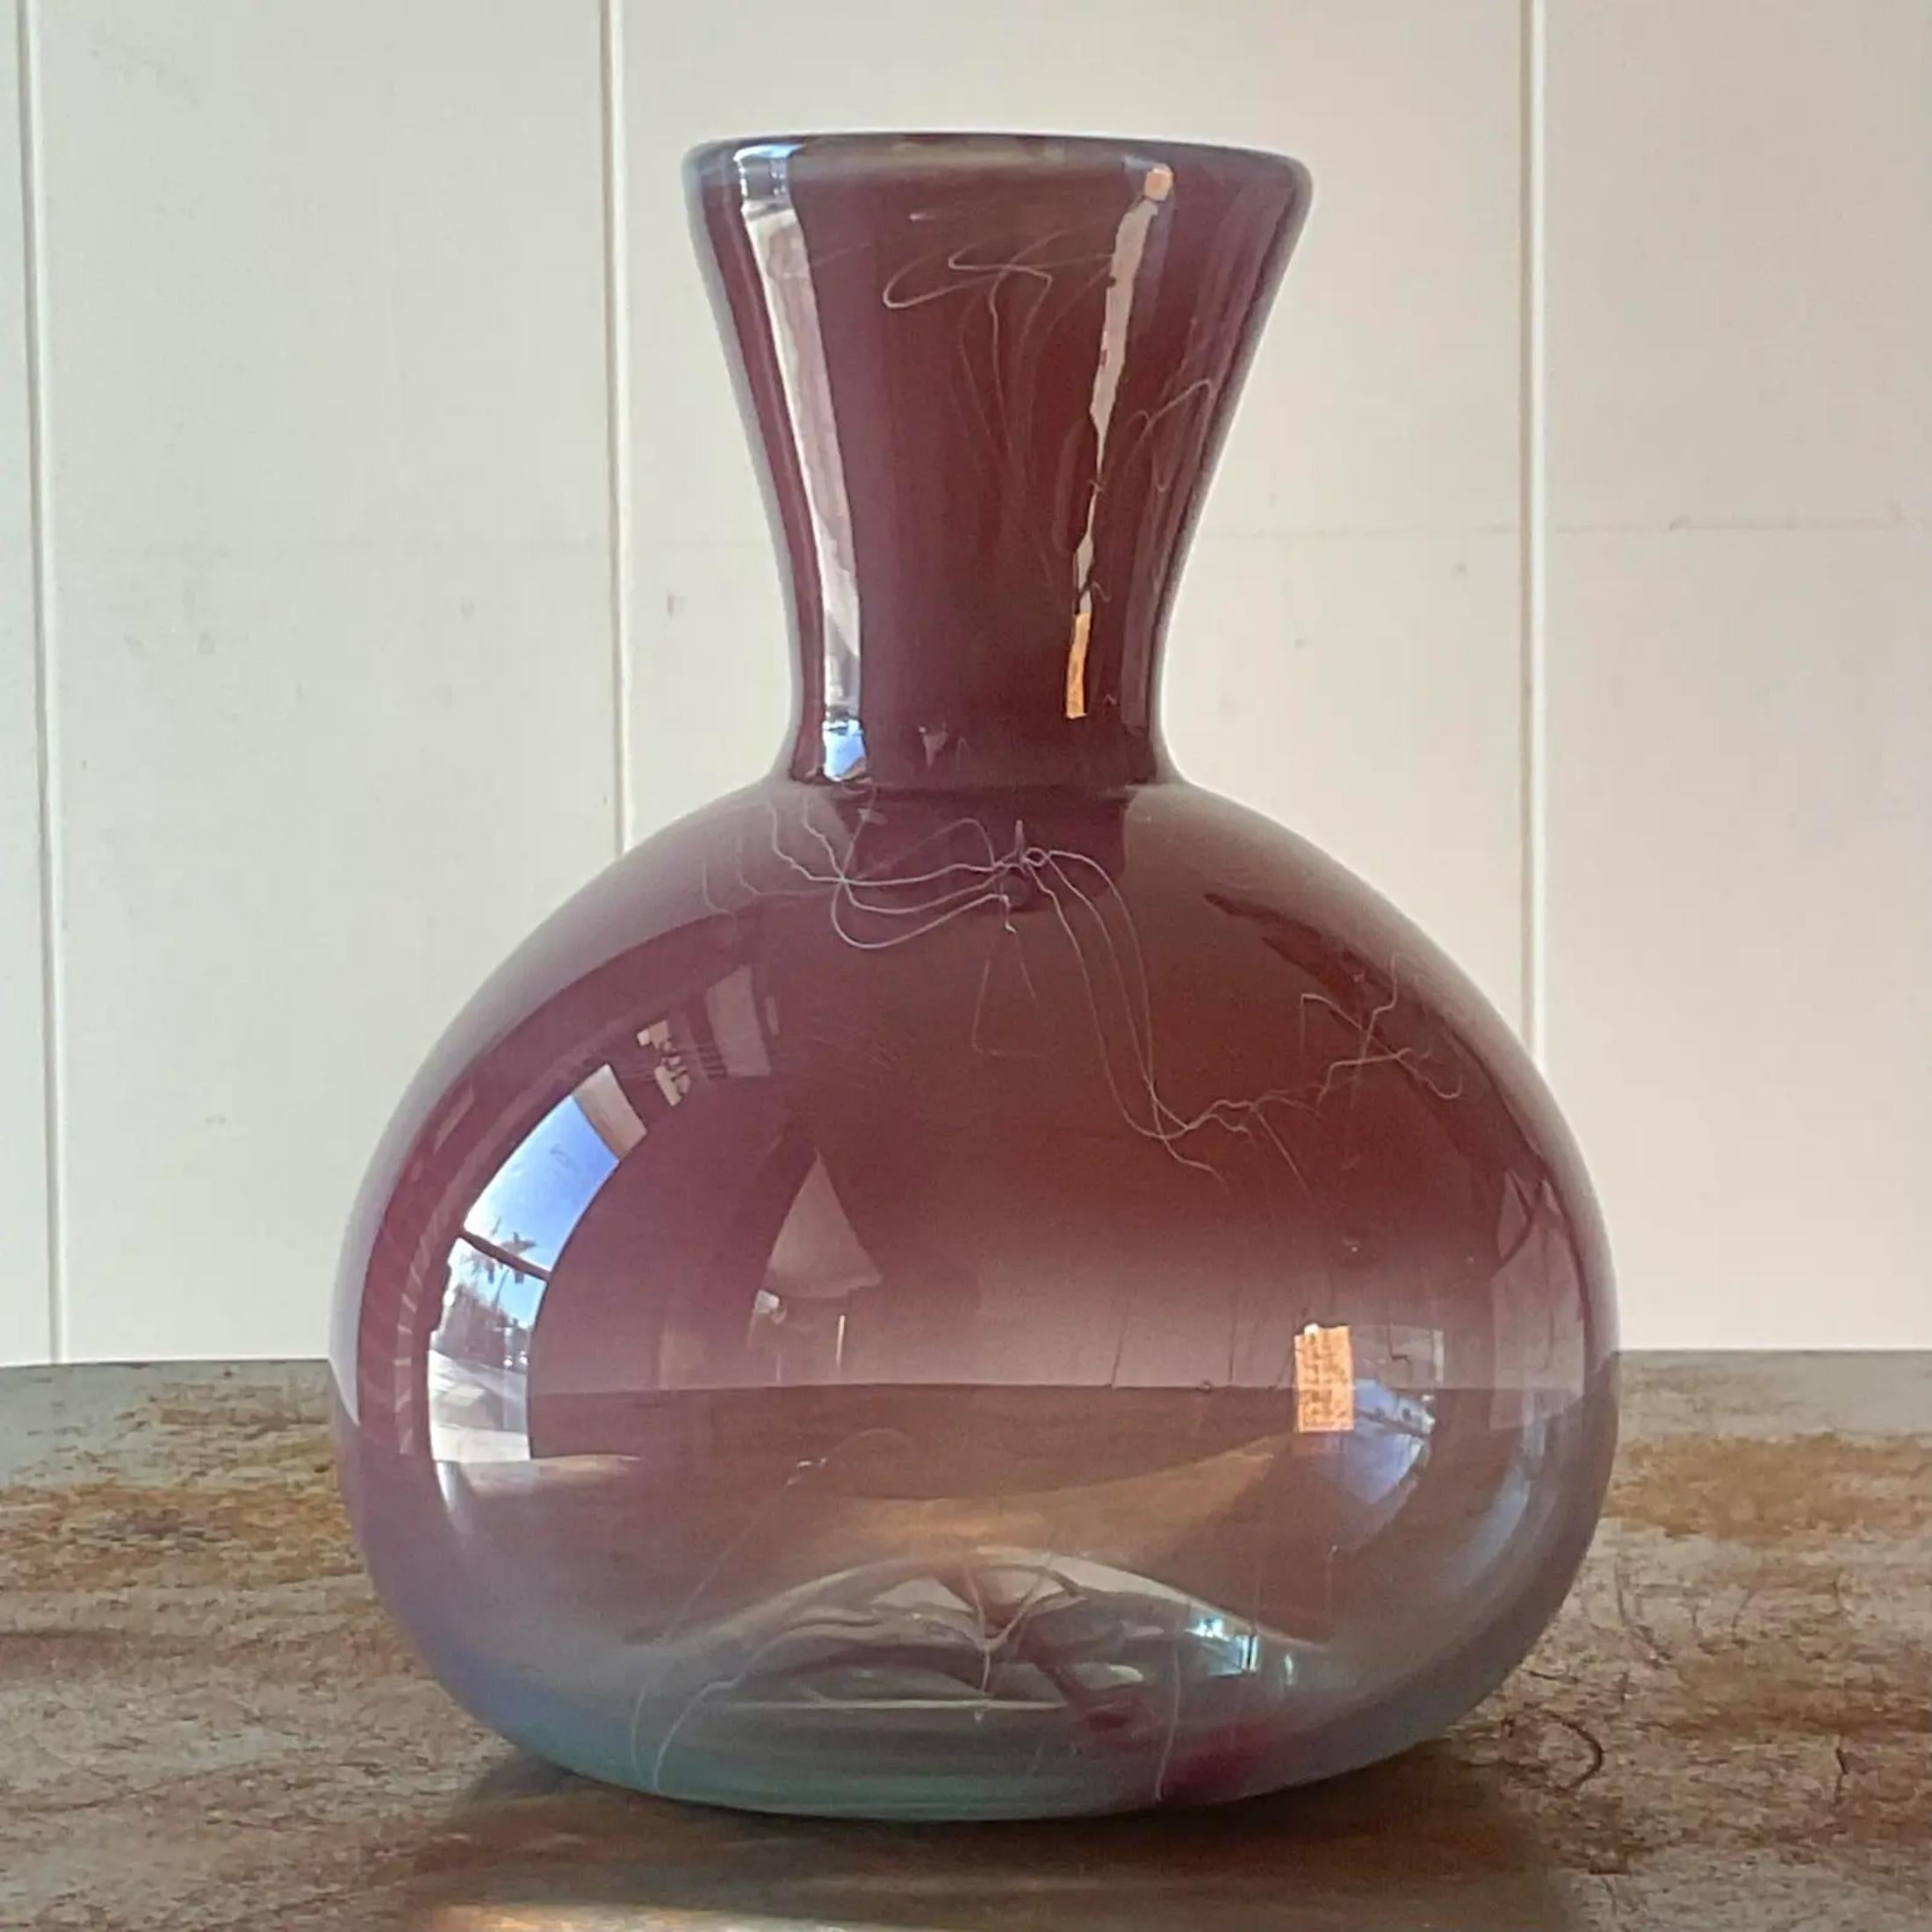 A stunning vintage Boho glass vase. A chic Radiant rose colored glass with a fused squiggle on top. Signed on the bottom. Acquired from a Palm Beach estate